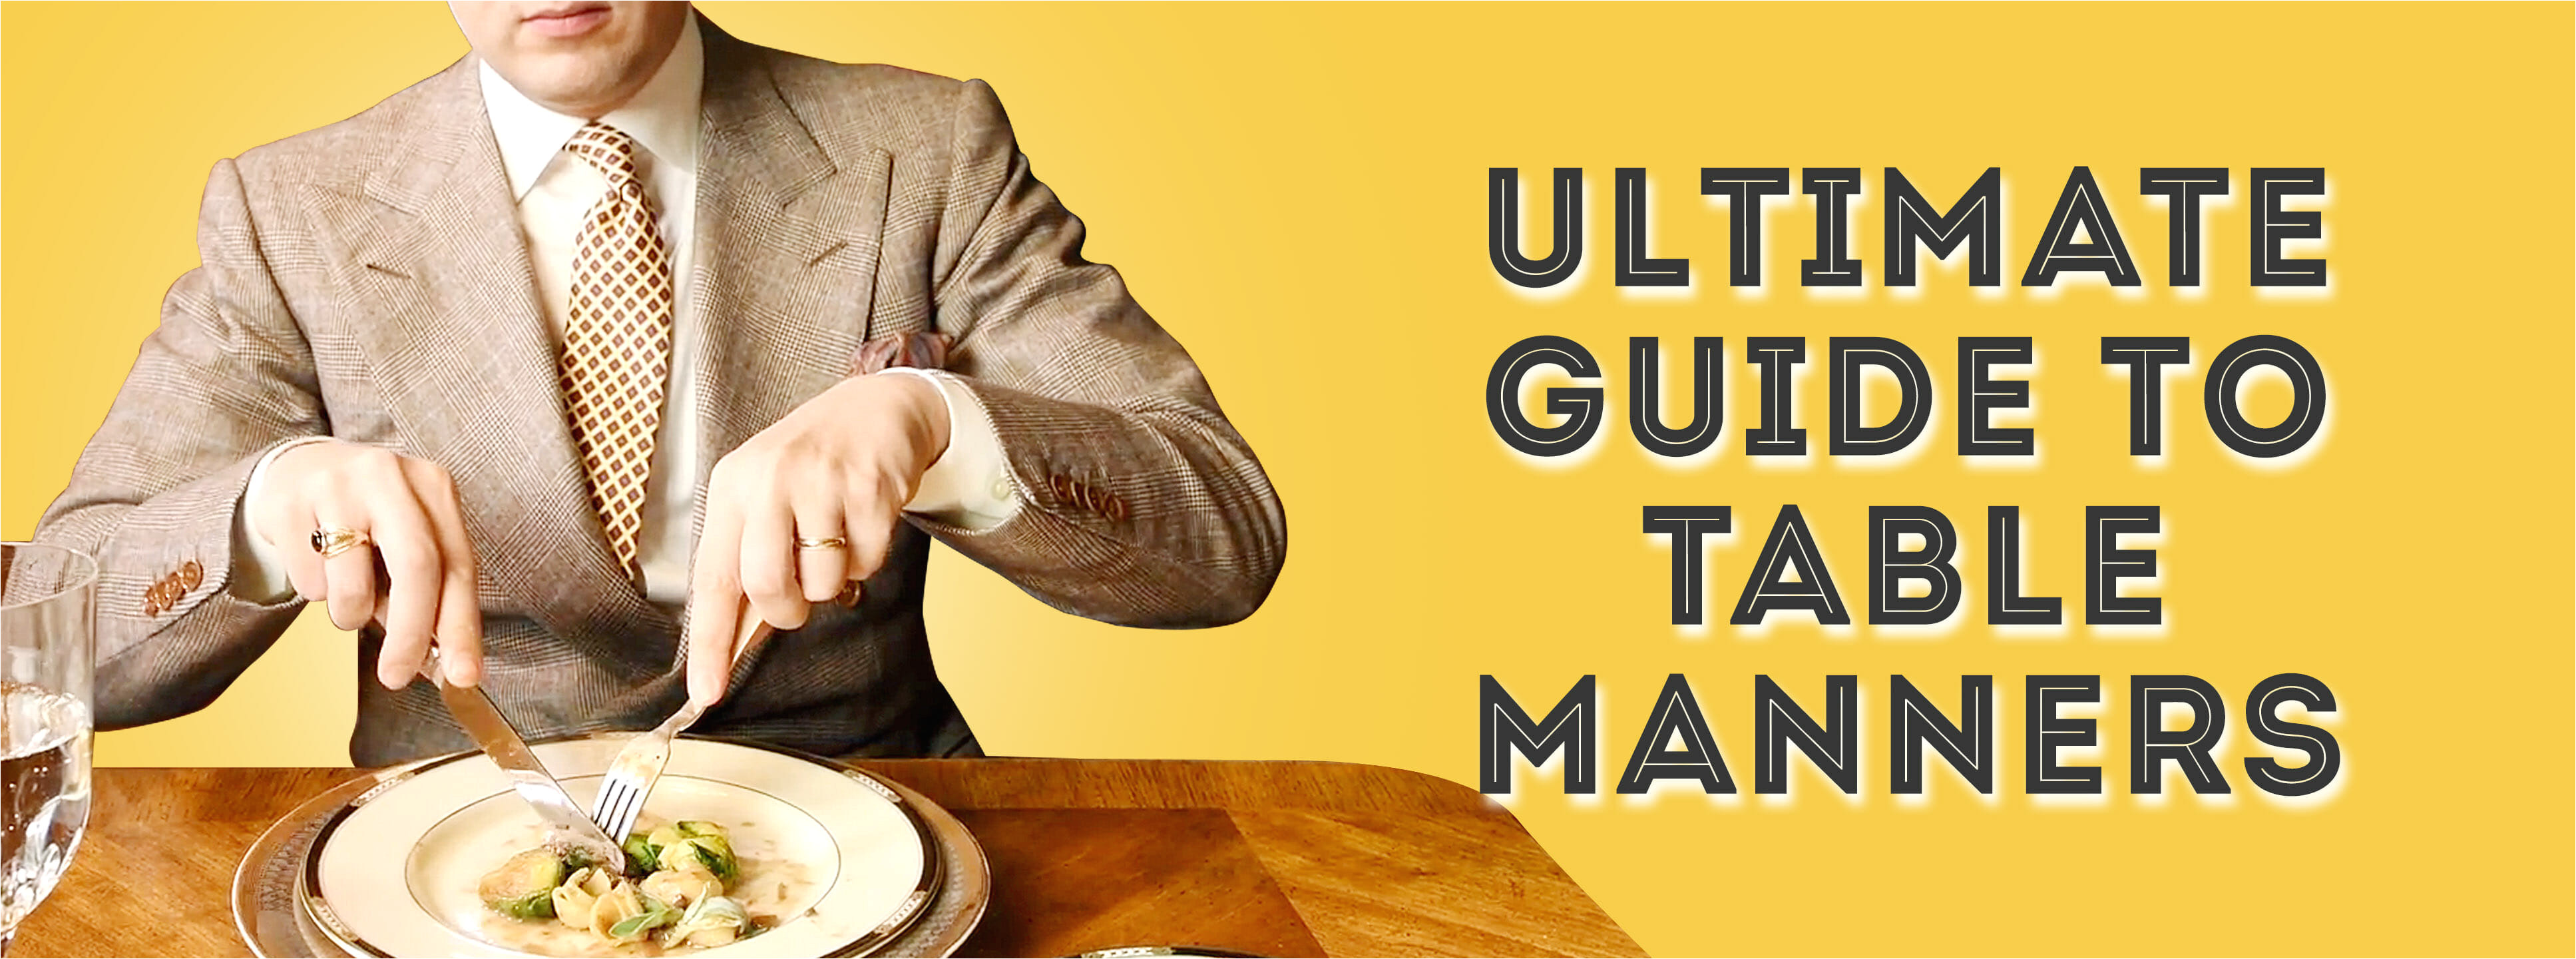 best chinese delivery in fargo nd table manners ultimate guide to dining etiquette gentleman s gazette